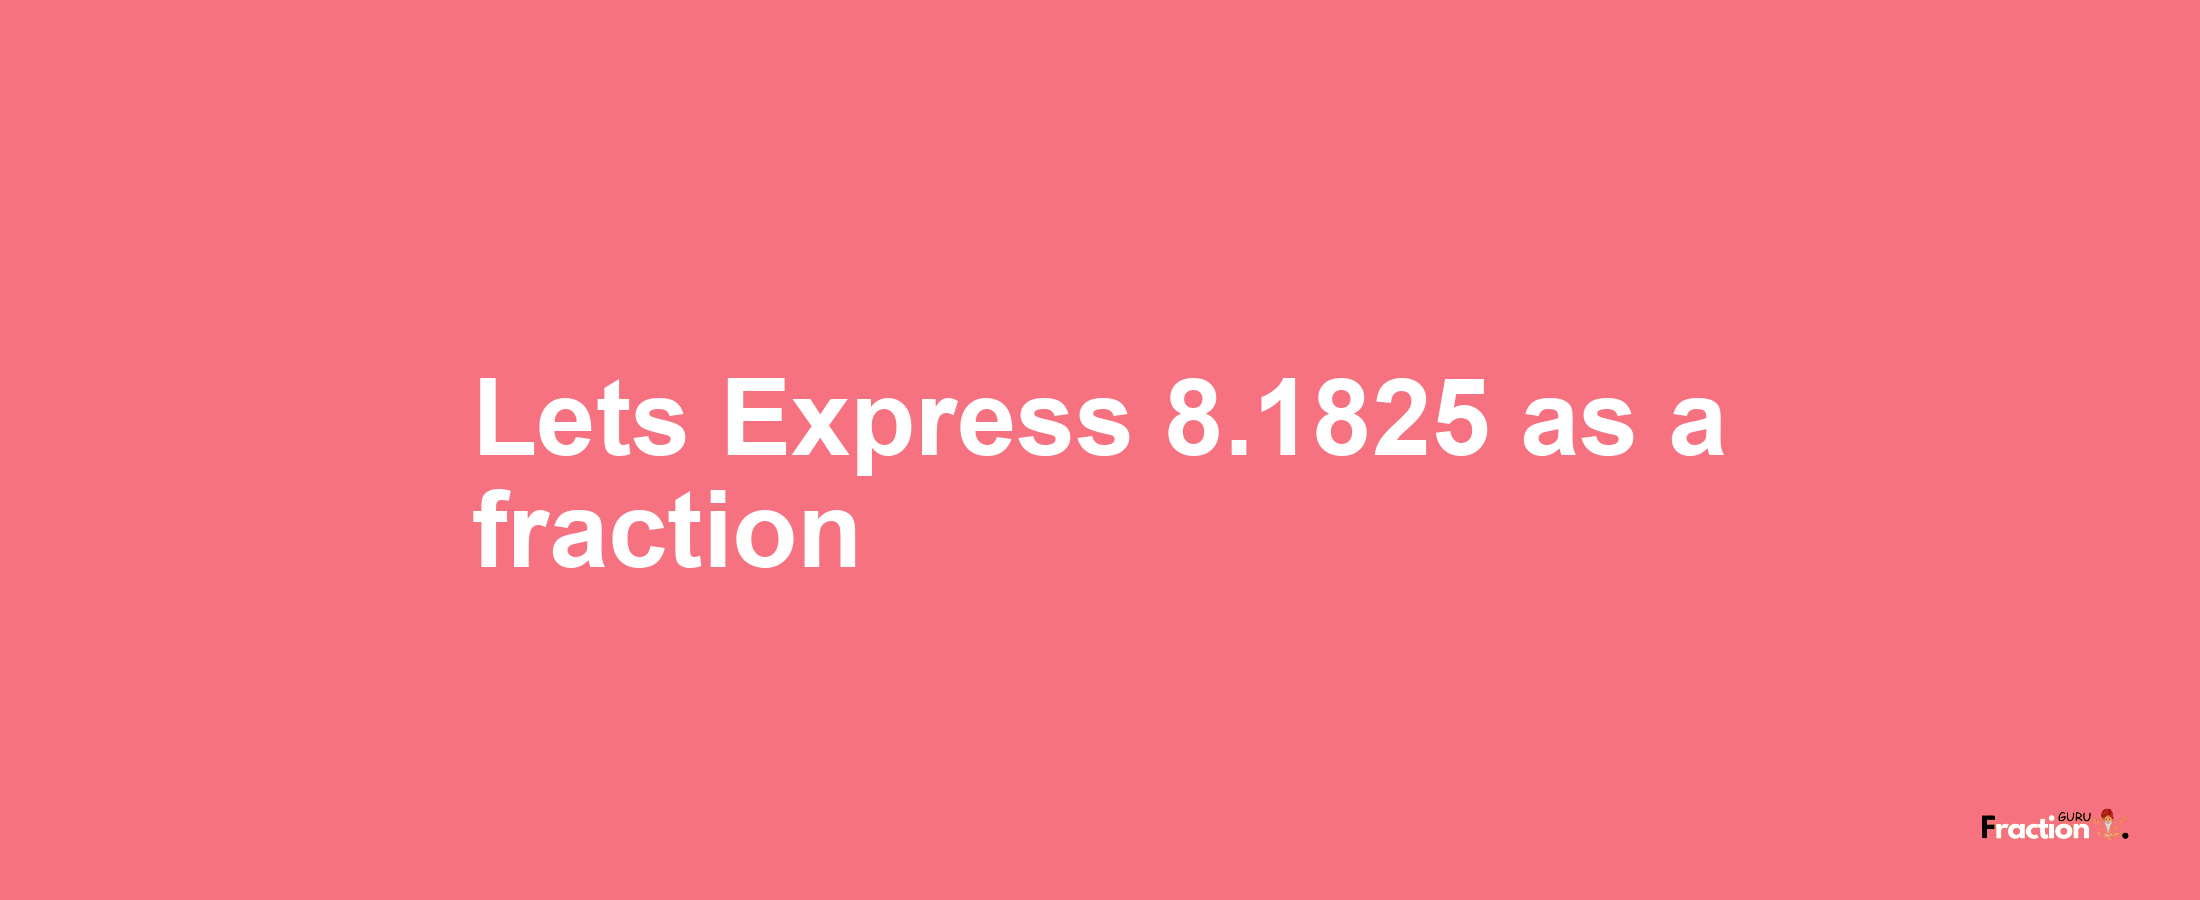 Lets Express 8.1825 as afraction